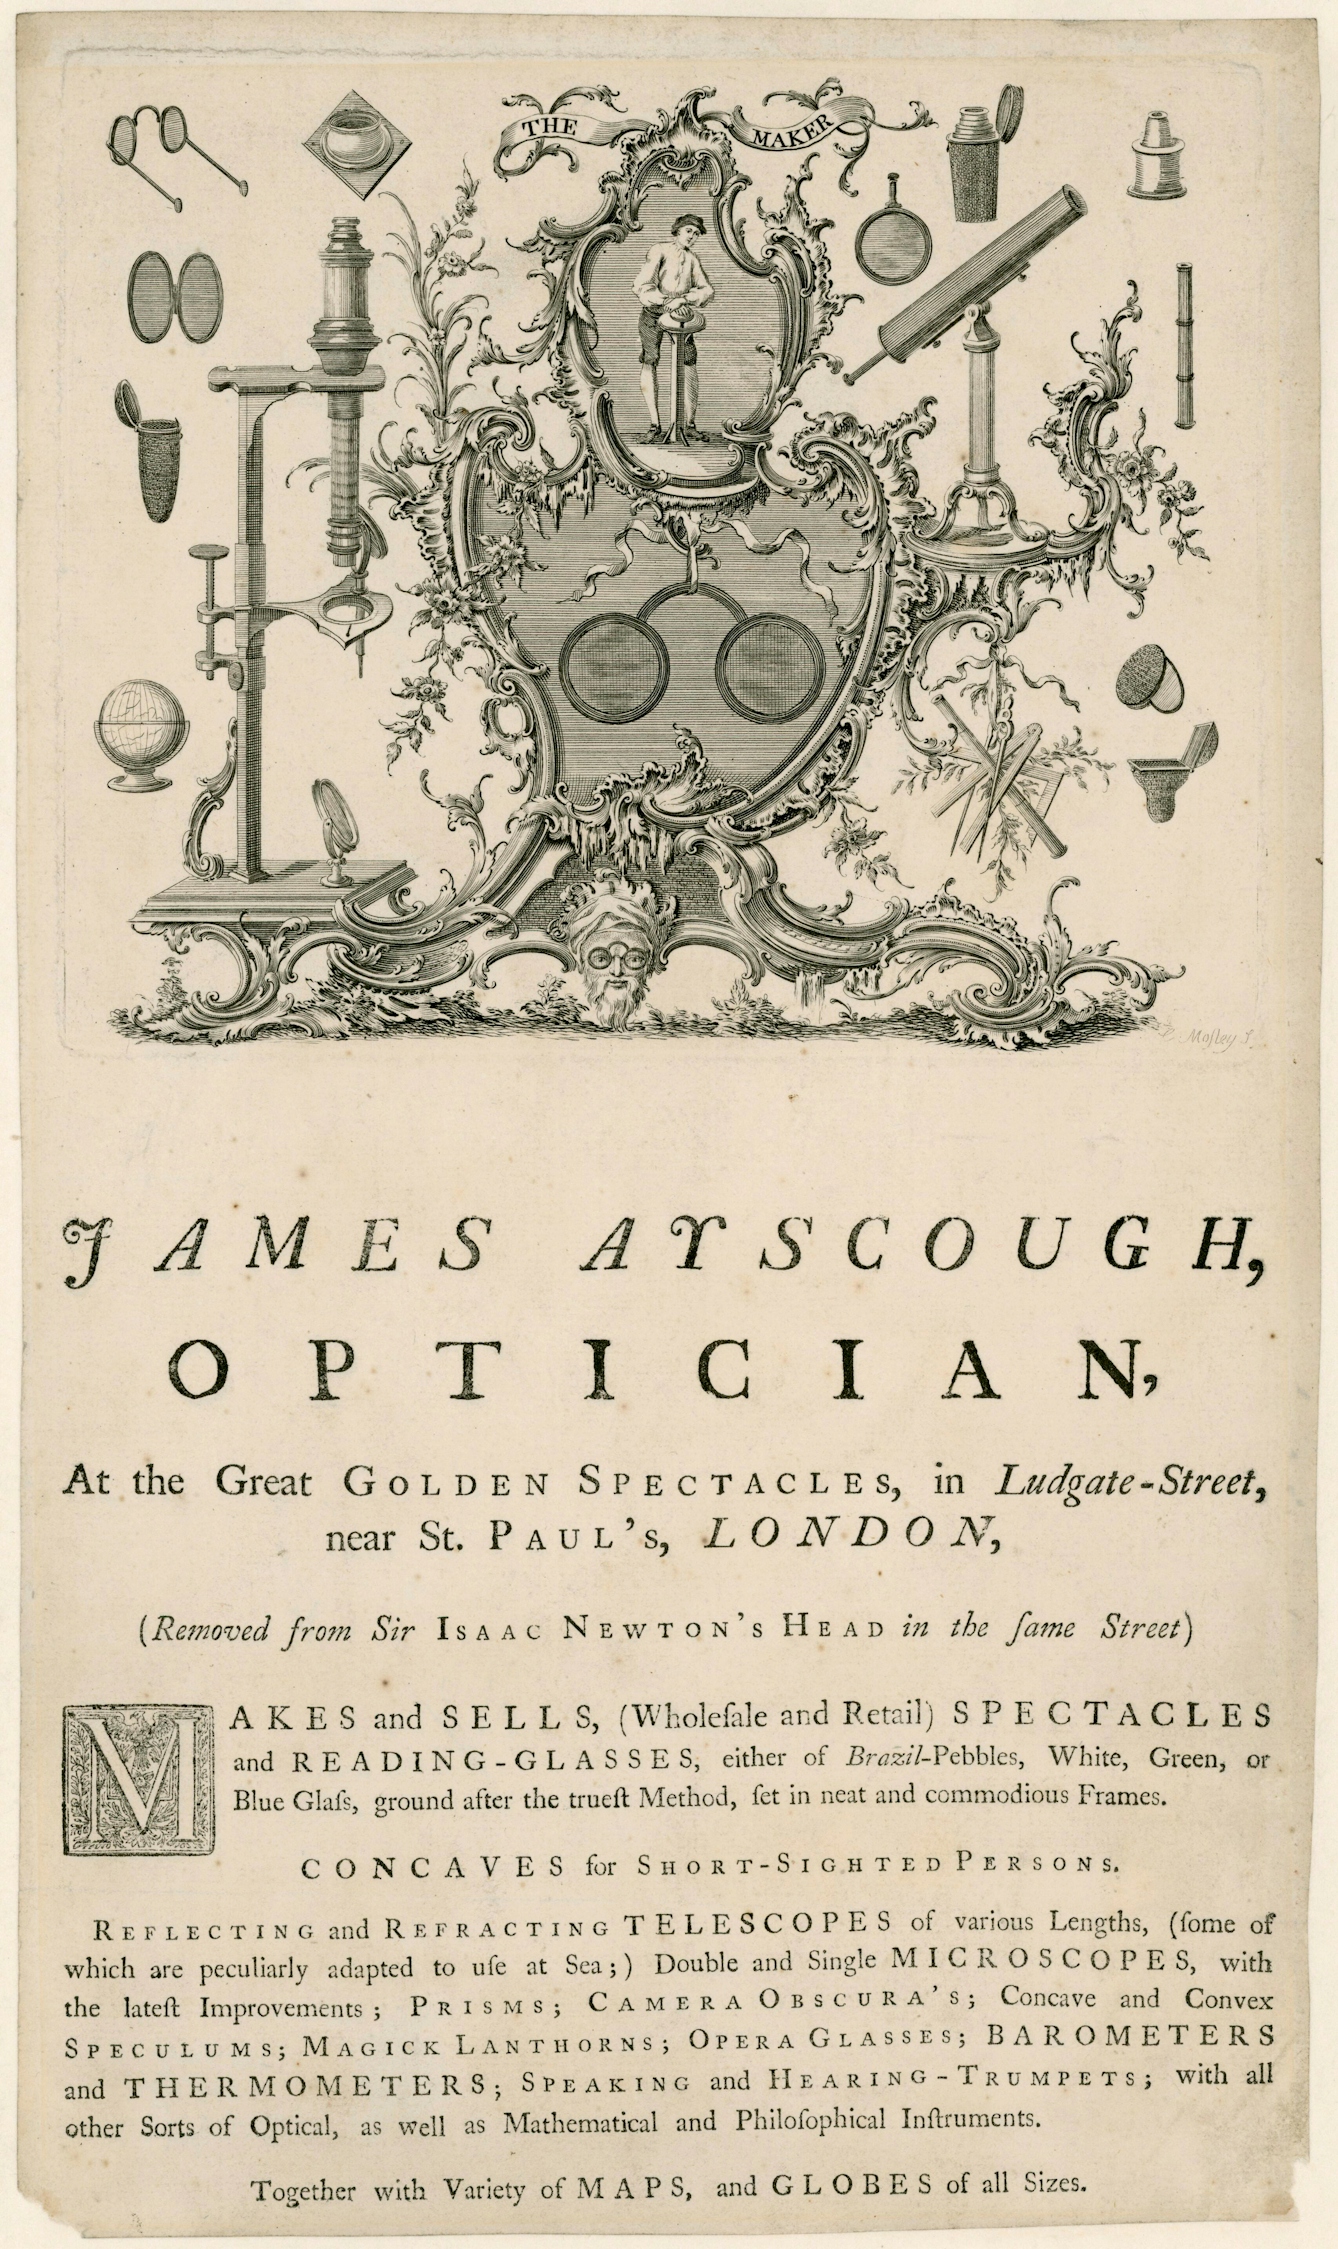 Top half of the sepia coloured page is an ornate line engraving of various optics-related objects incuding glases, a microscope, a telescope a hand magnifier and several spectacles. In the centre of some ornate scrolls is the figure of a standing tradesman in shirt and britches. A banner above him says "The Maker". Below the ornamentation text reads "James Ayscough, optician". Details of his  workshop, the Great Golden Spectacles in London are given and a lsit of the optical products he makes.